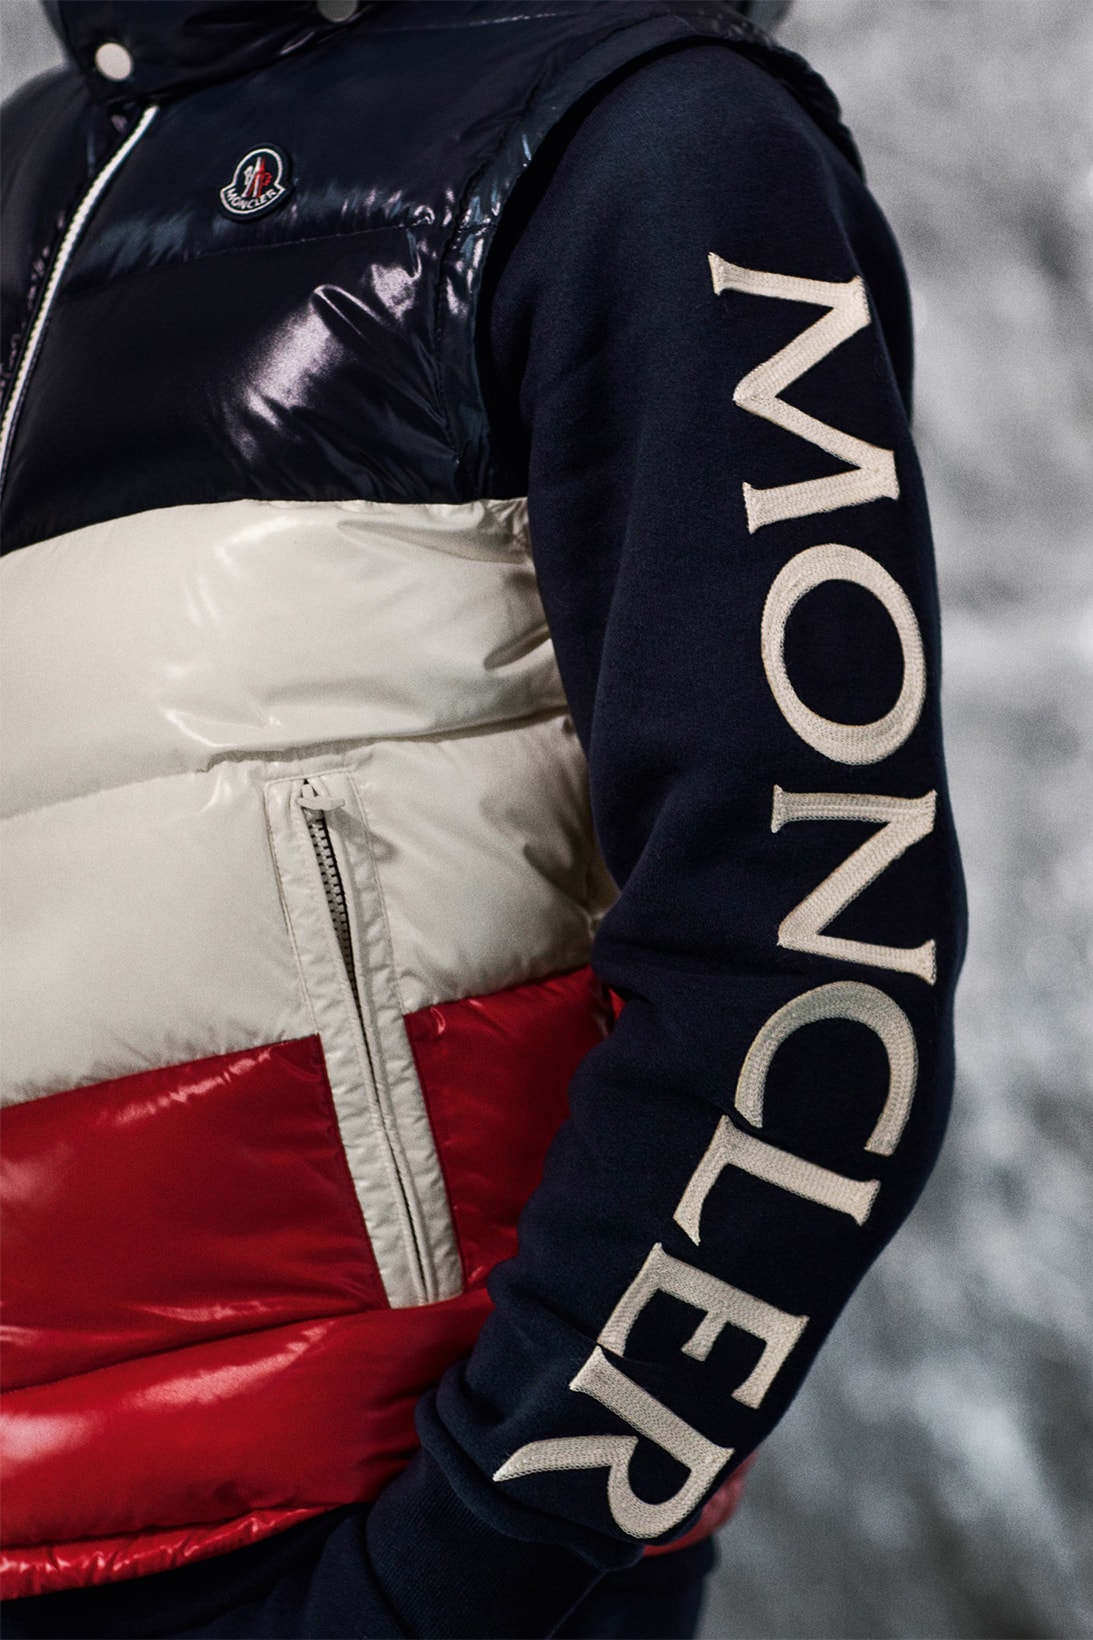 KITH Moncler Collaboration Lookbook Collection ASICS GEL Lyte III Red White Blue 2017 December 2 9 Release Date Info Delivery 1 2 Sneakers Shoes Footwear